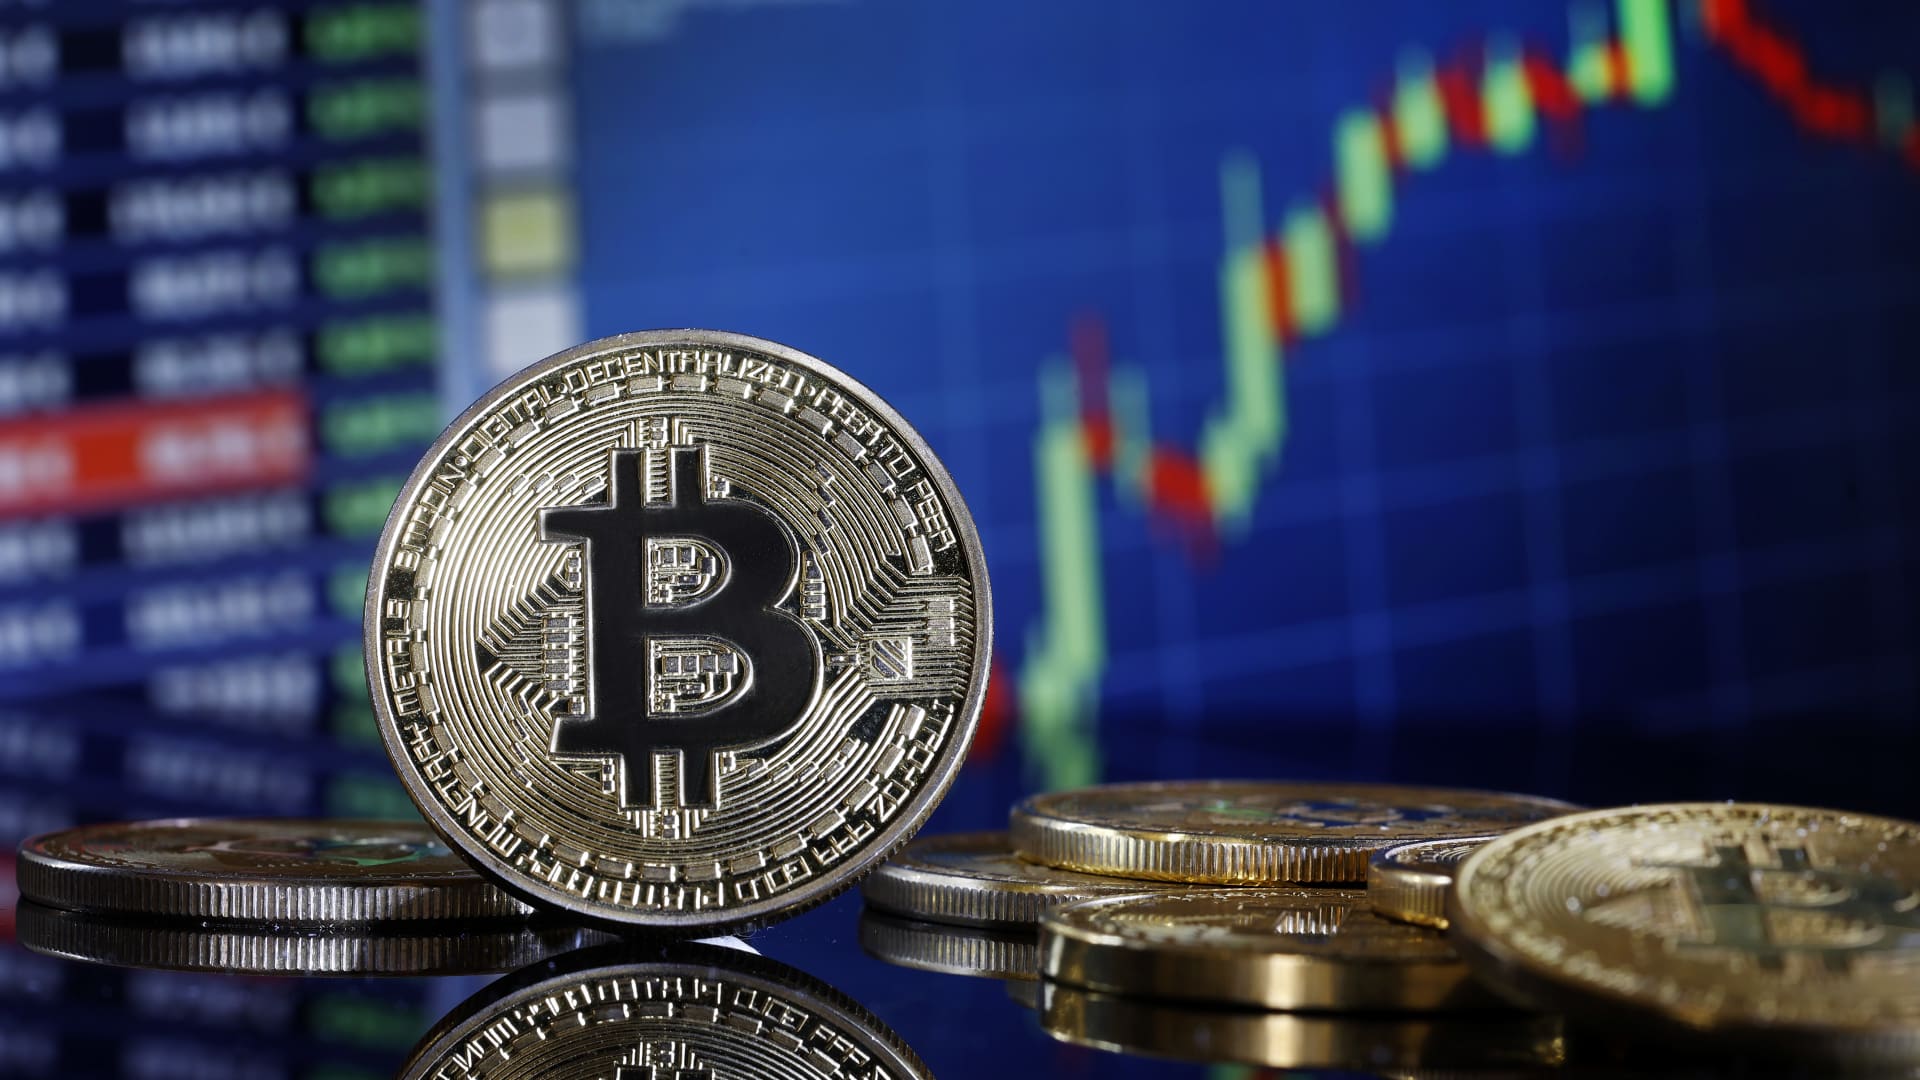 Bitcoin jumps above $60,000 for the first time since November 2021